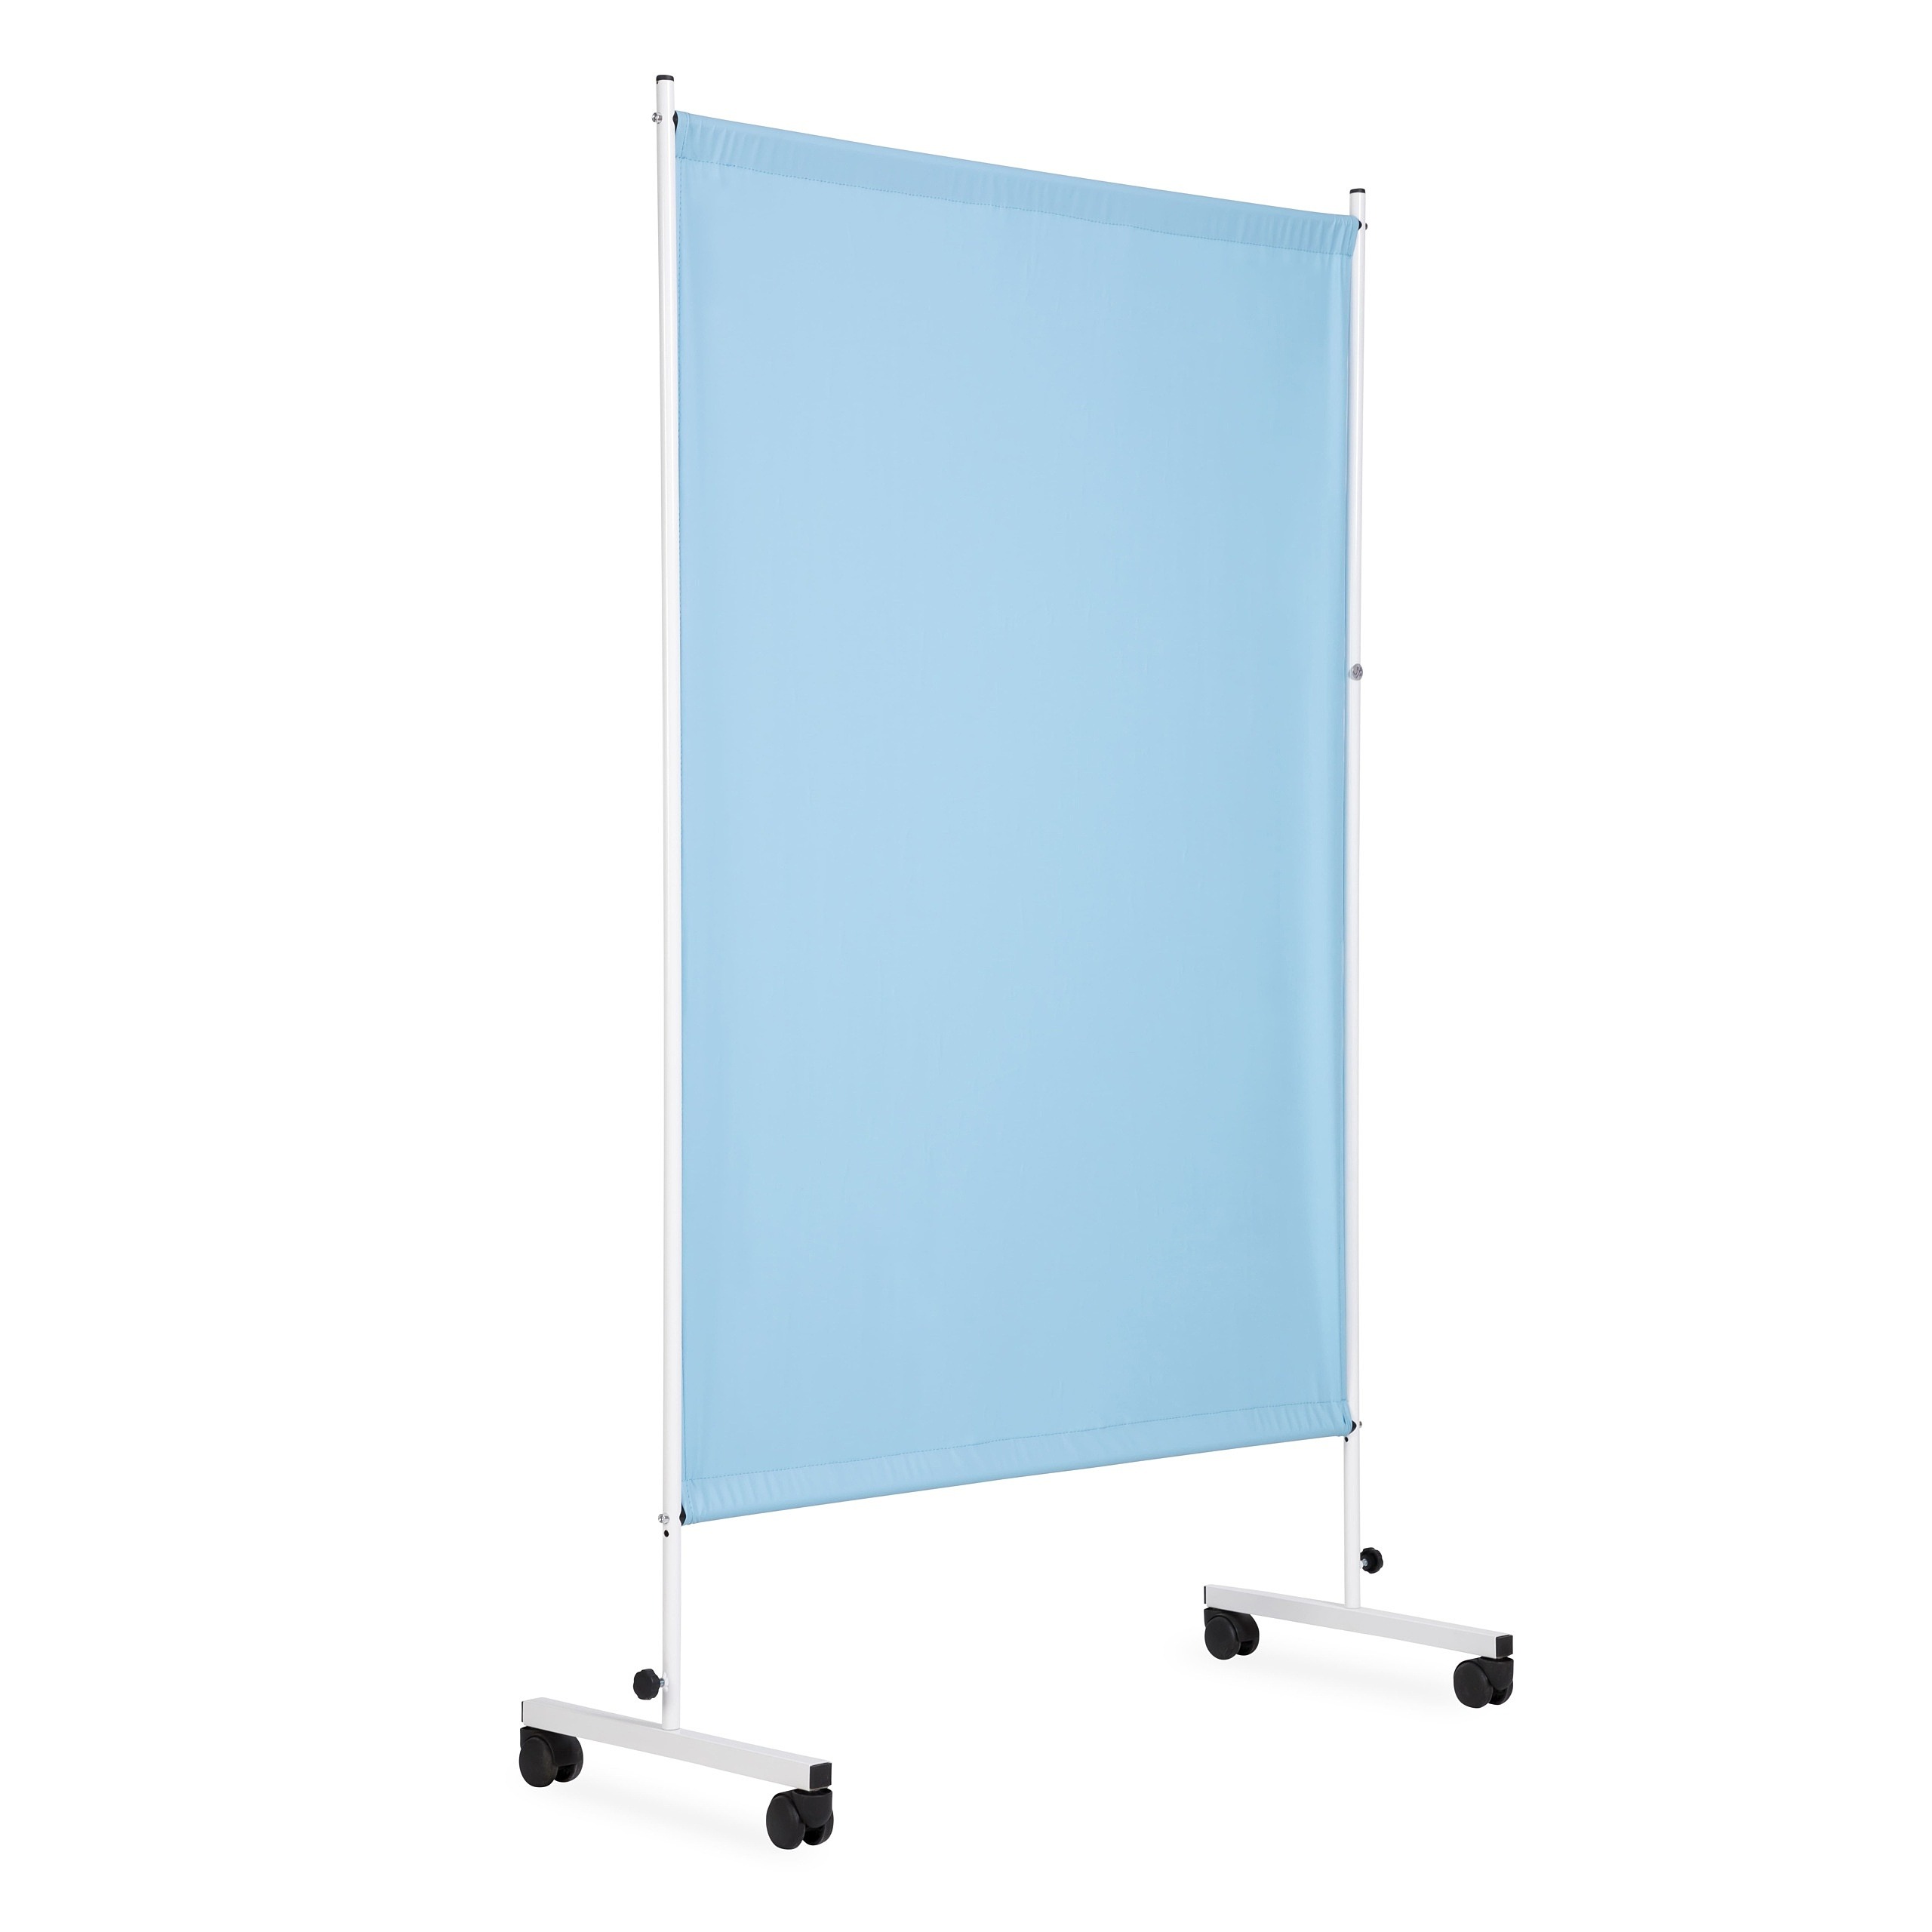 Privacy medical screens